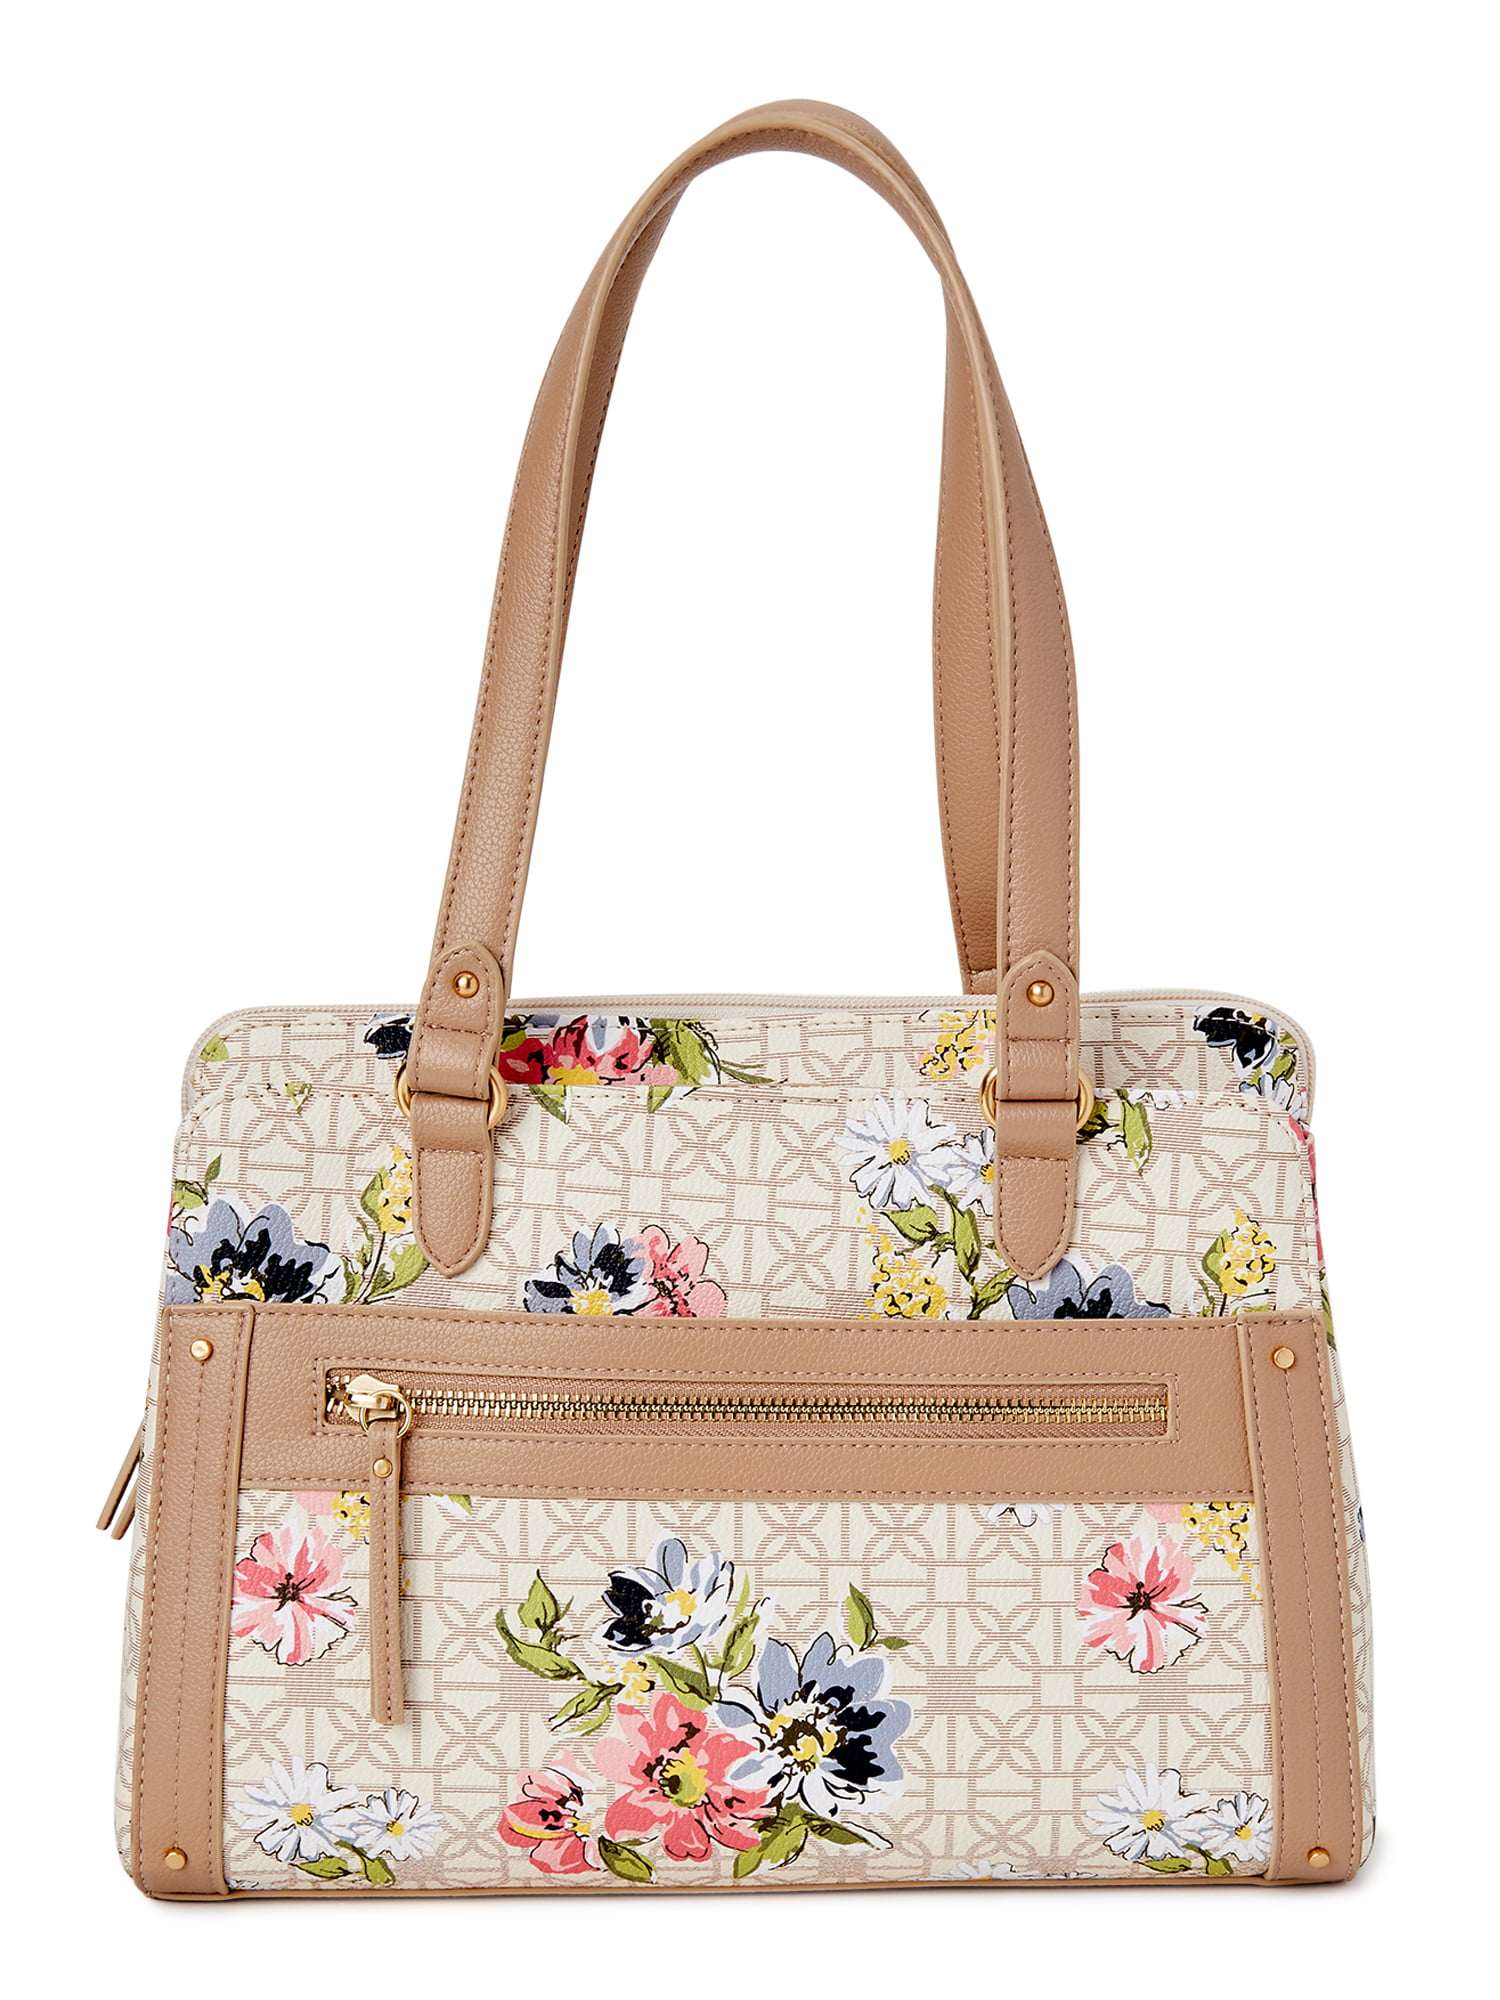 Front Personalized Lotus Flowers Classic Tote Purse w/Leather Trim 